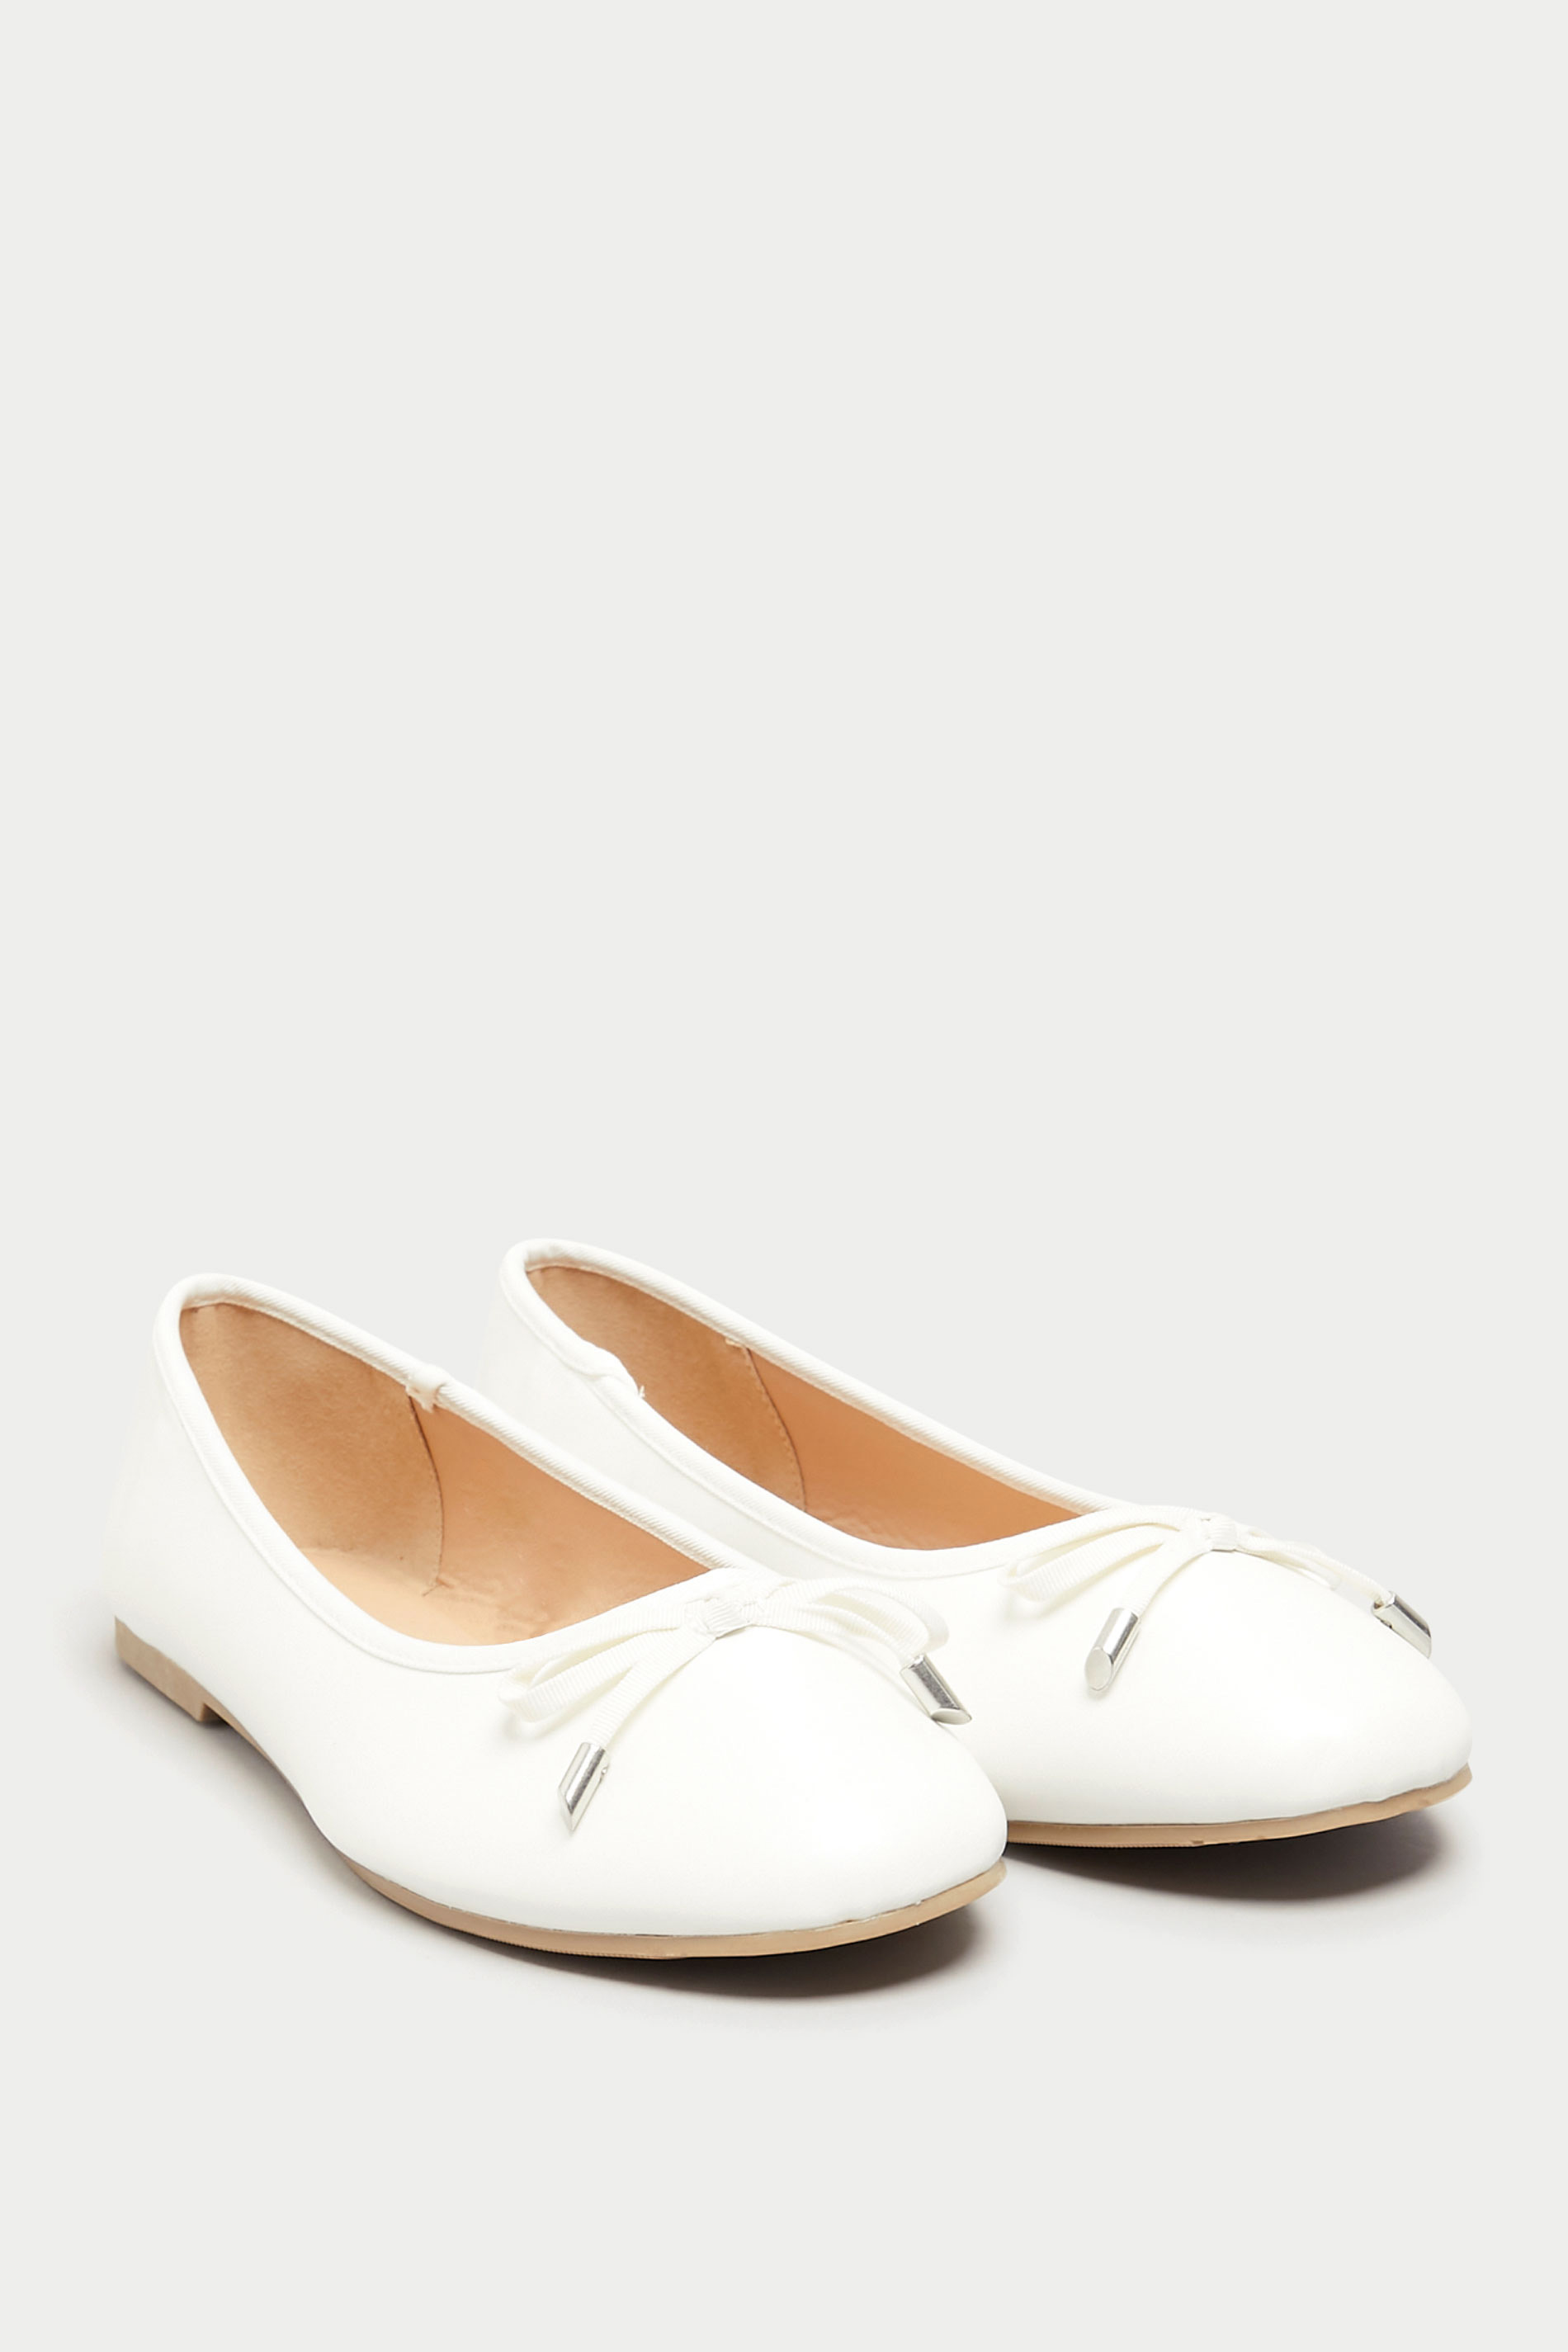 White Ballerina Pumps In Wide E Fit & Extra Wide EEE Fit | Yours Clothing 2